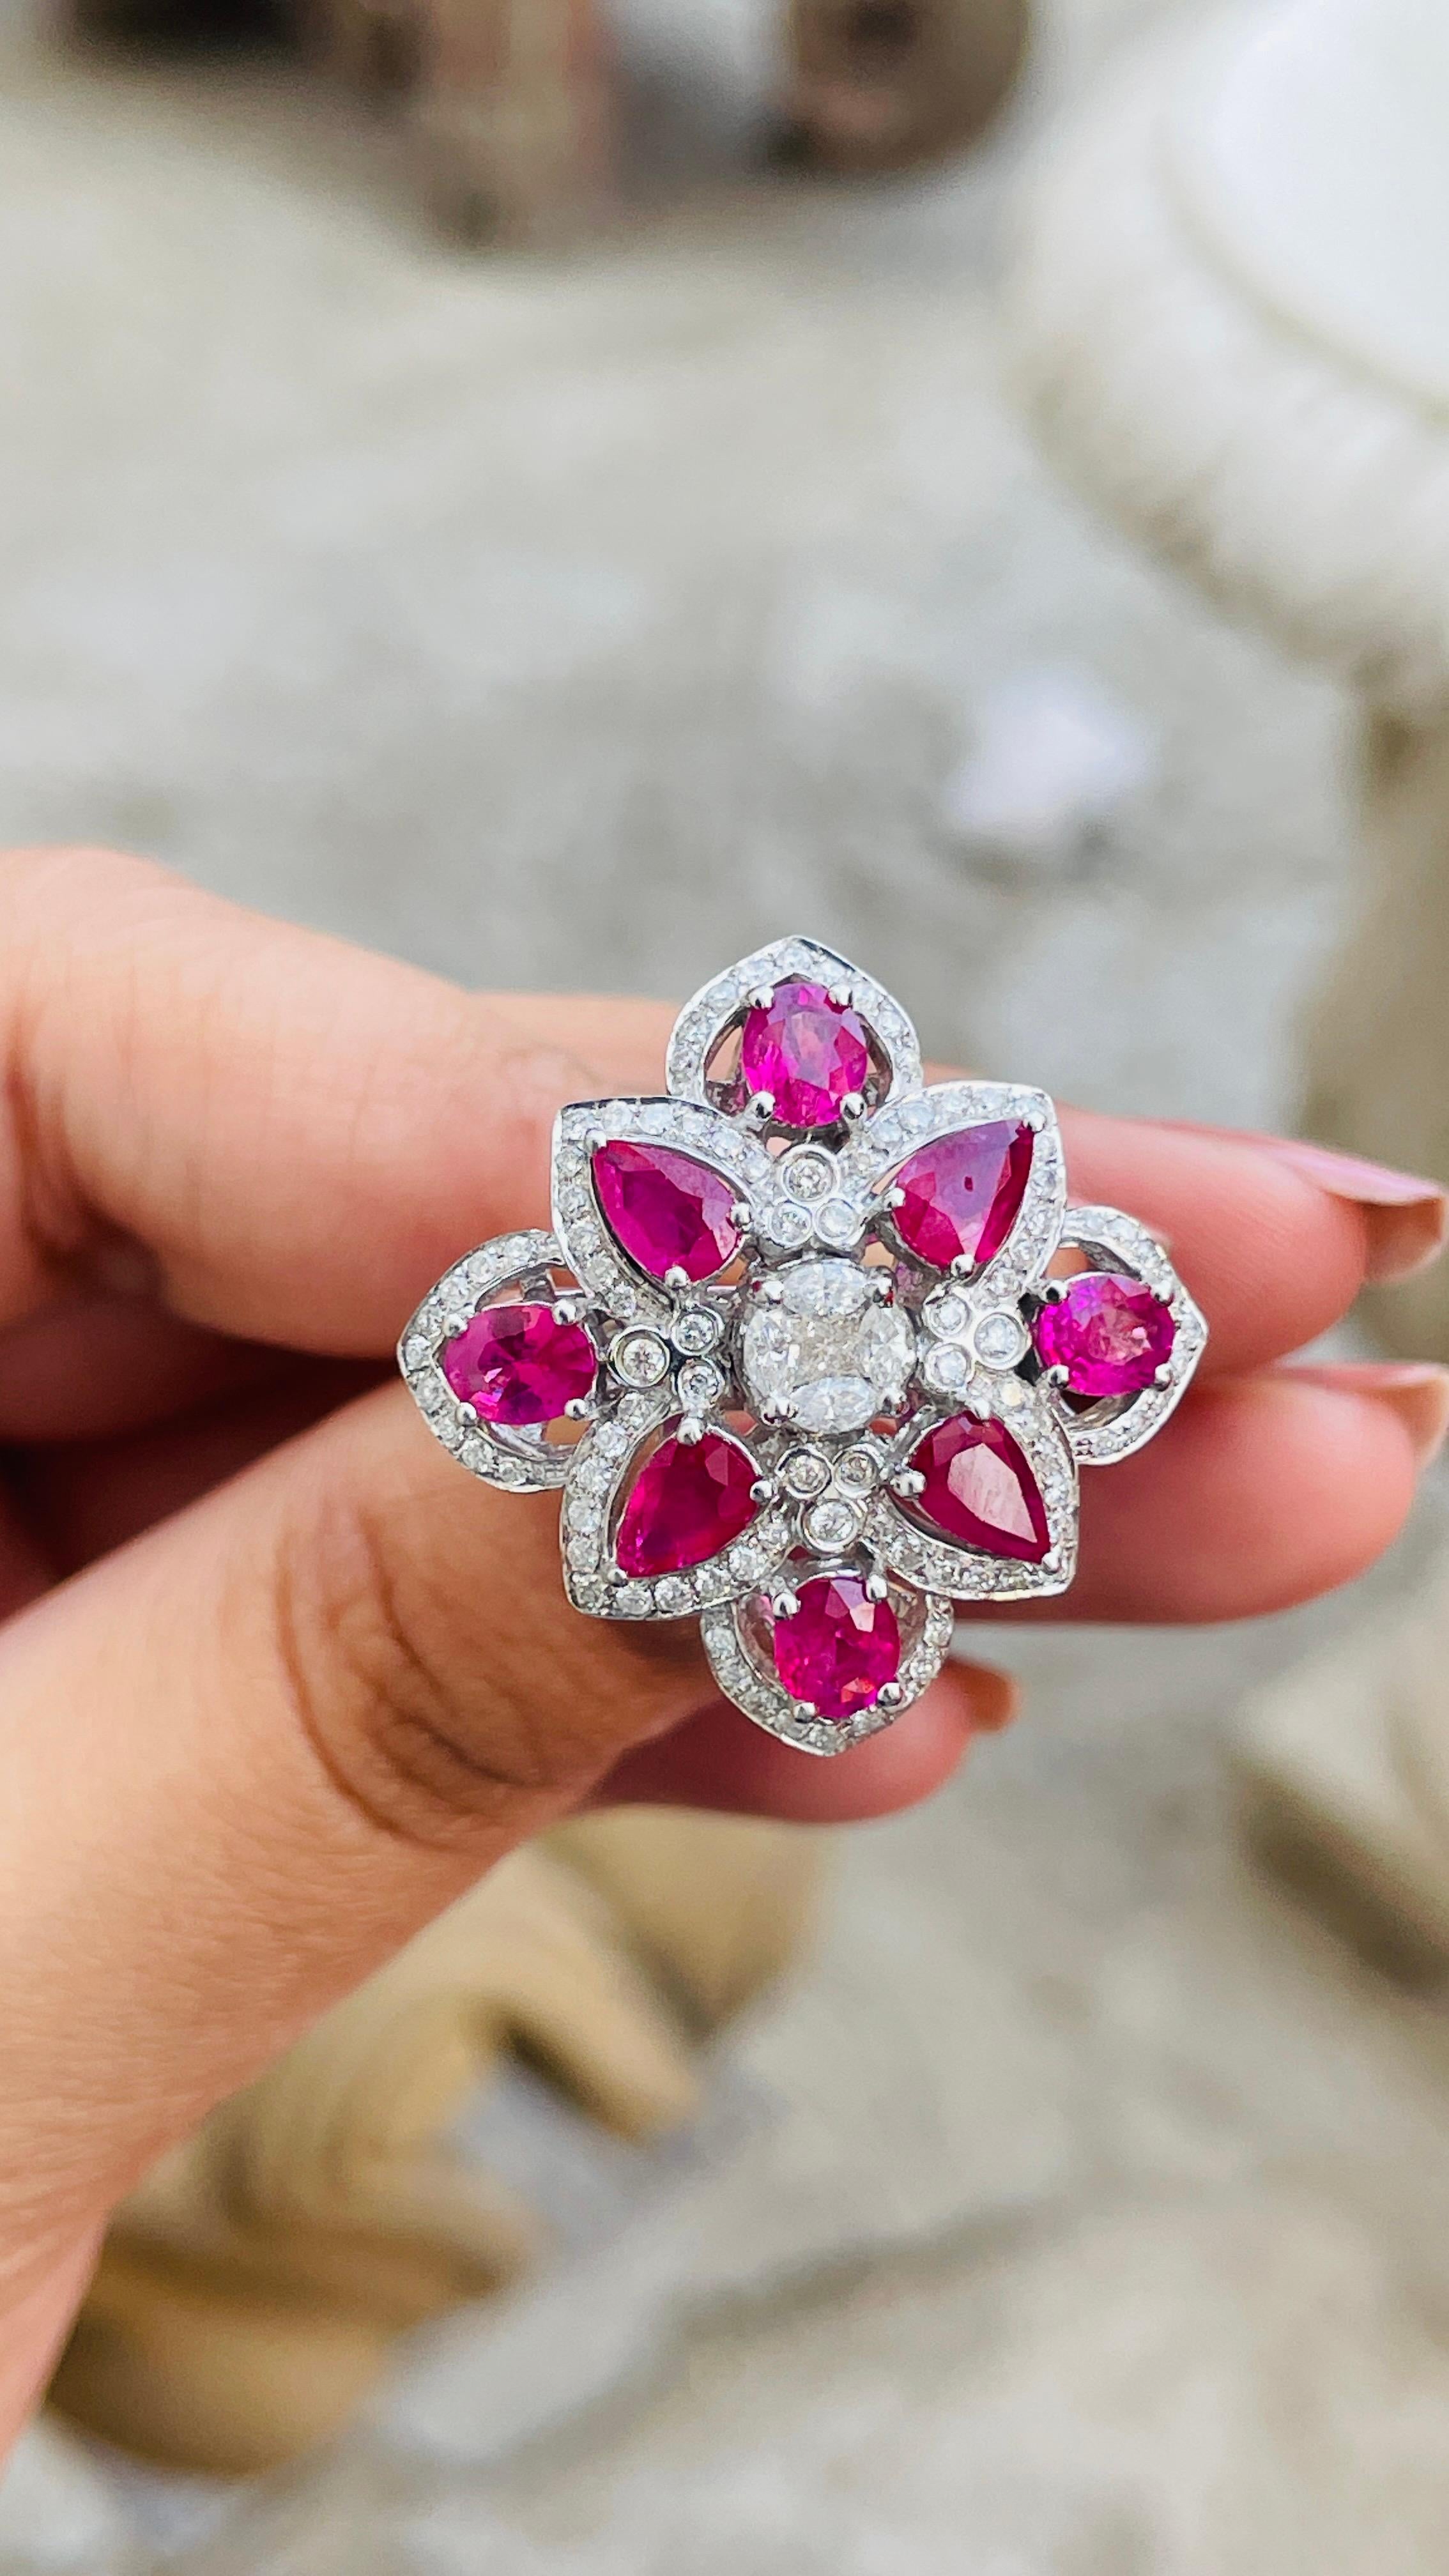 For Sale:  3.45 Carat Ruby and Diamond White Gold Ring in 14 Karat White Gold  6